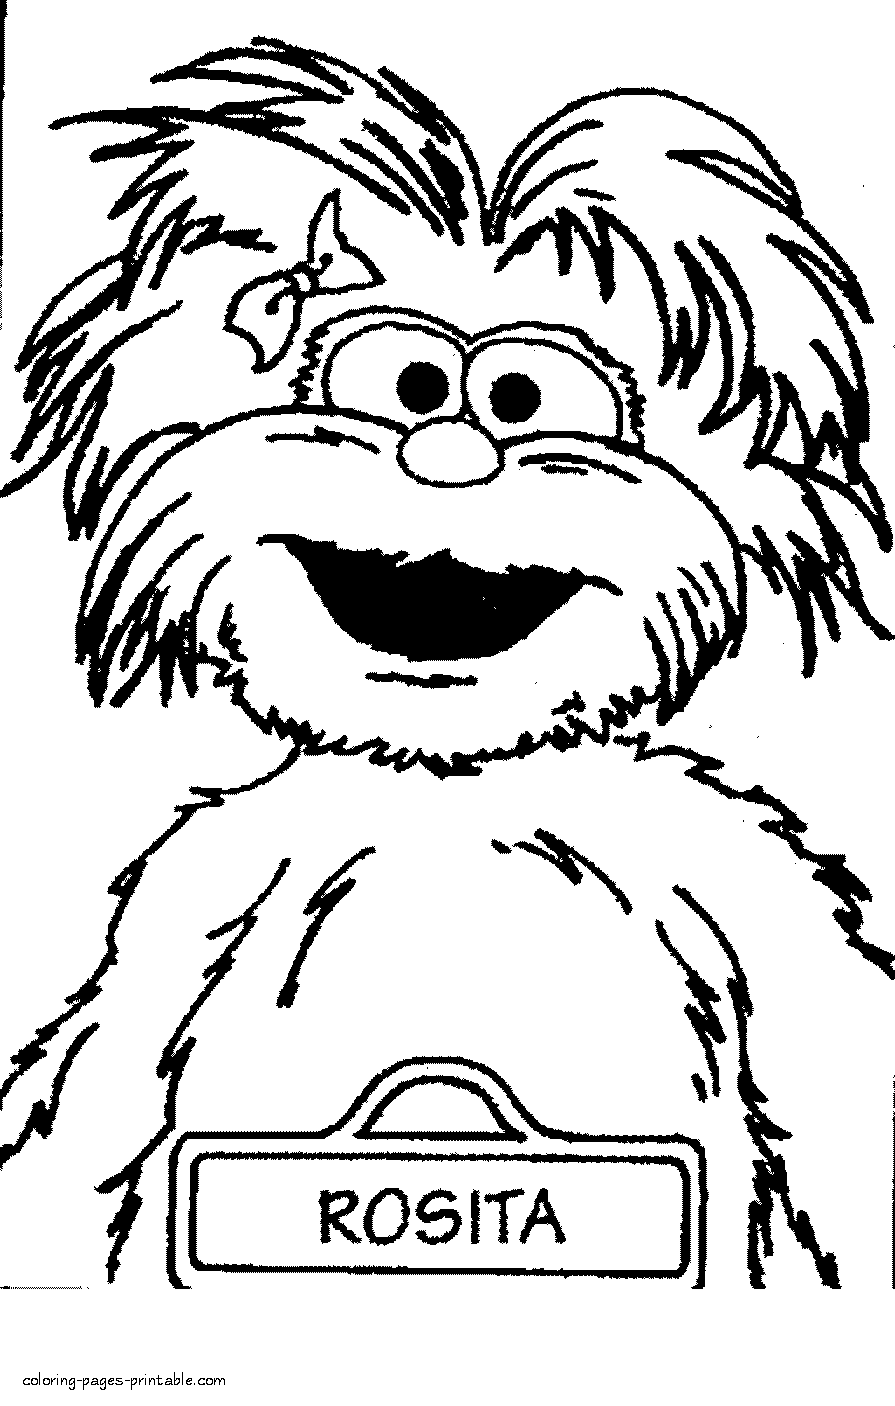 Sesame Street coloring pages to print. Rosita picture